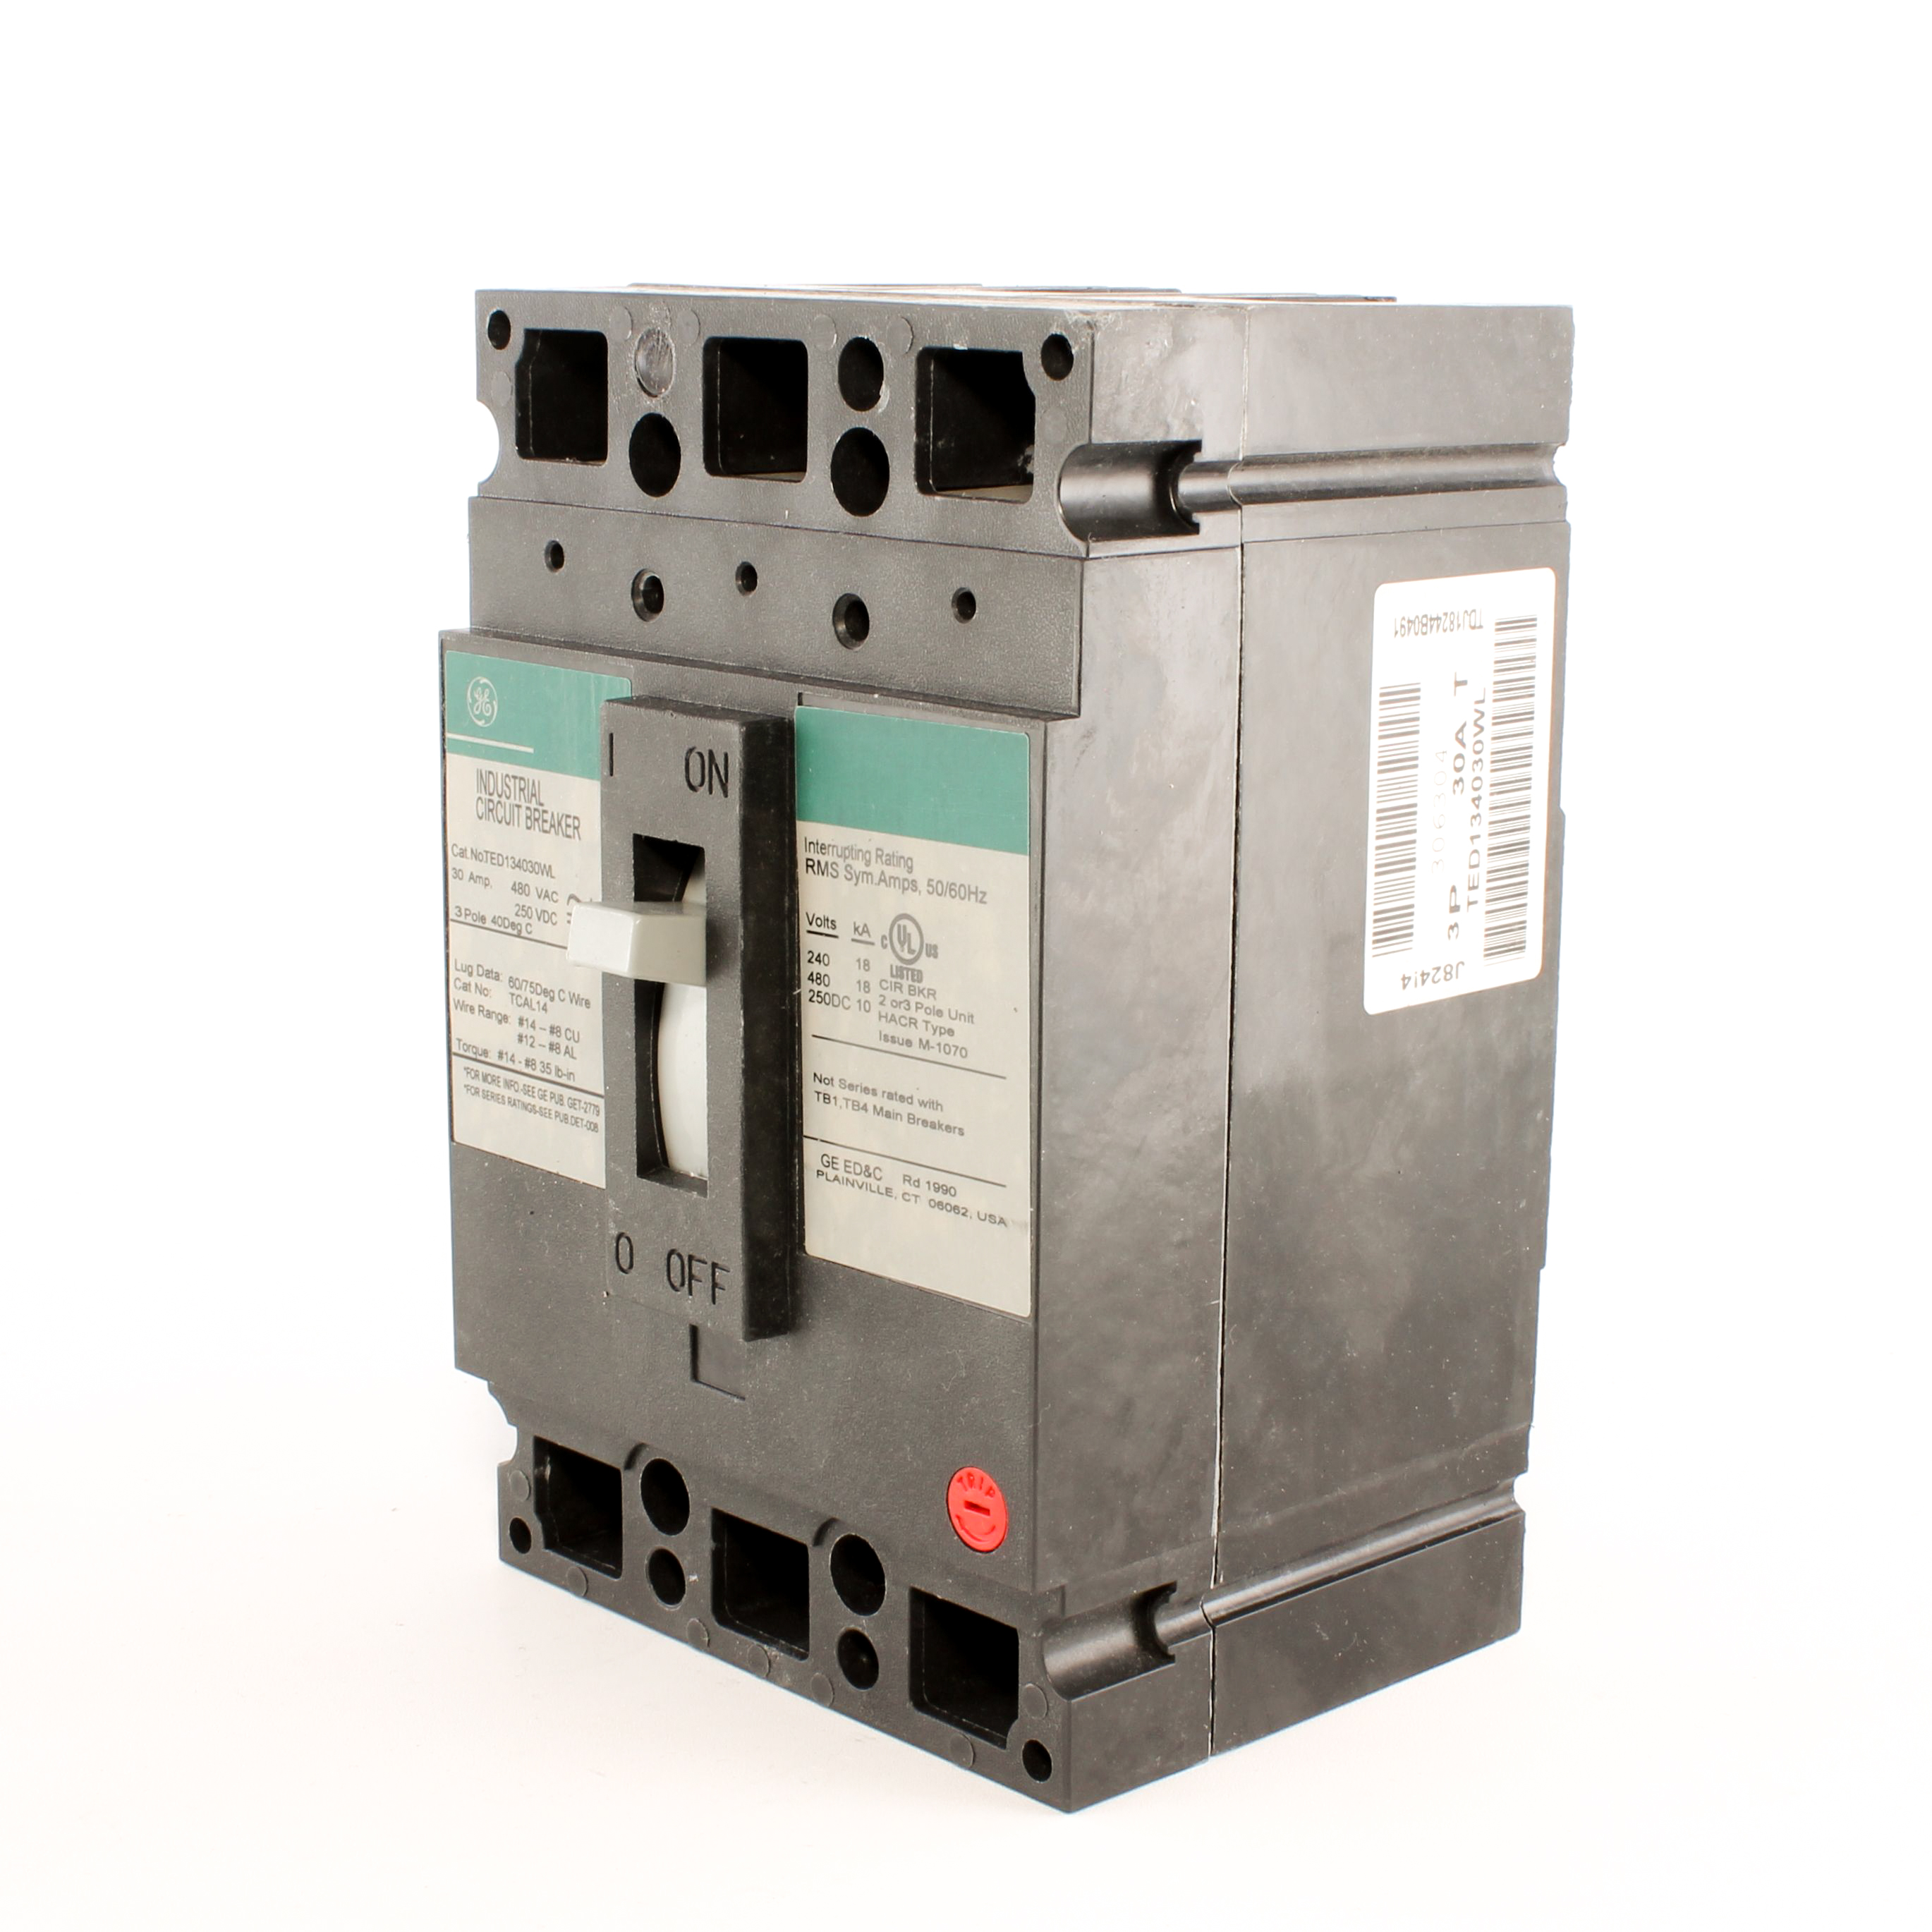 General Electric 3 Pole Circuit Breaker TED134030 